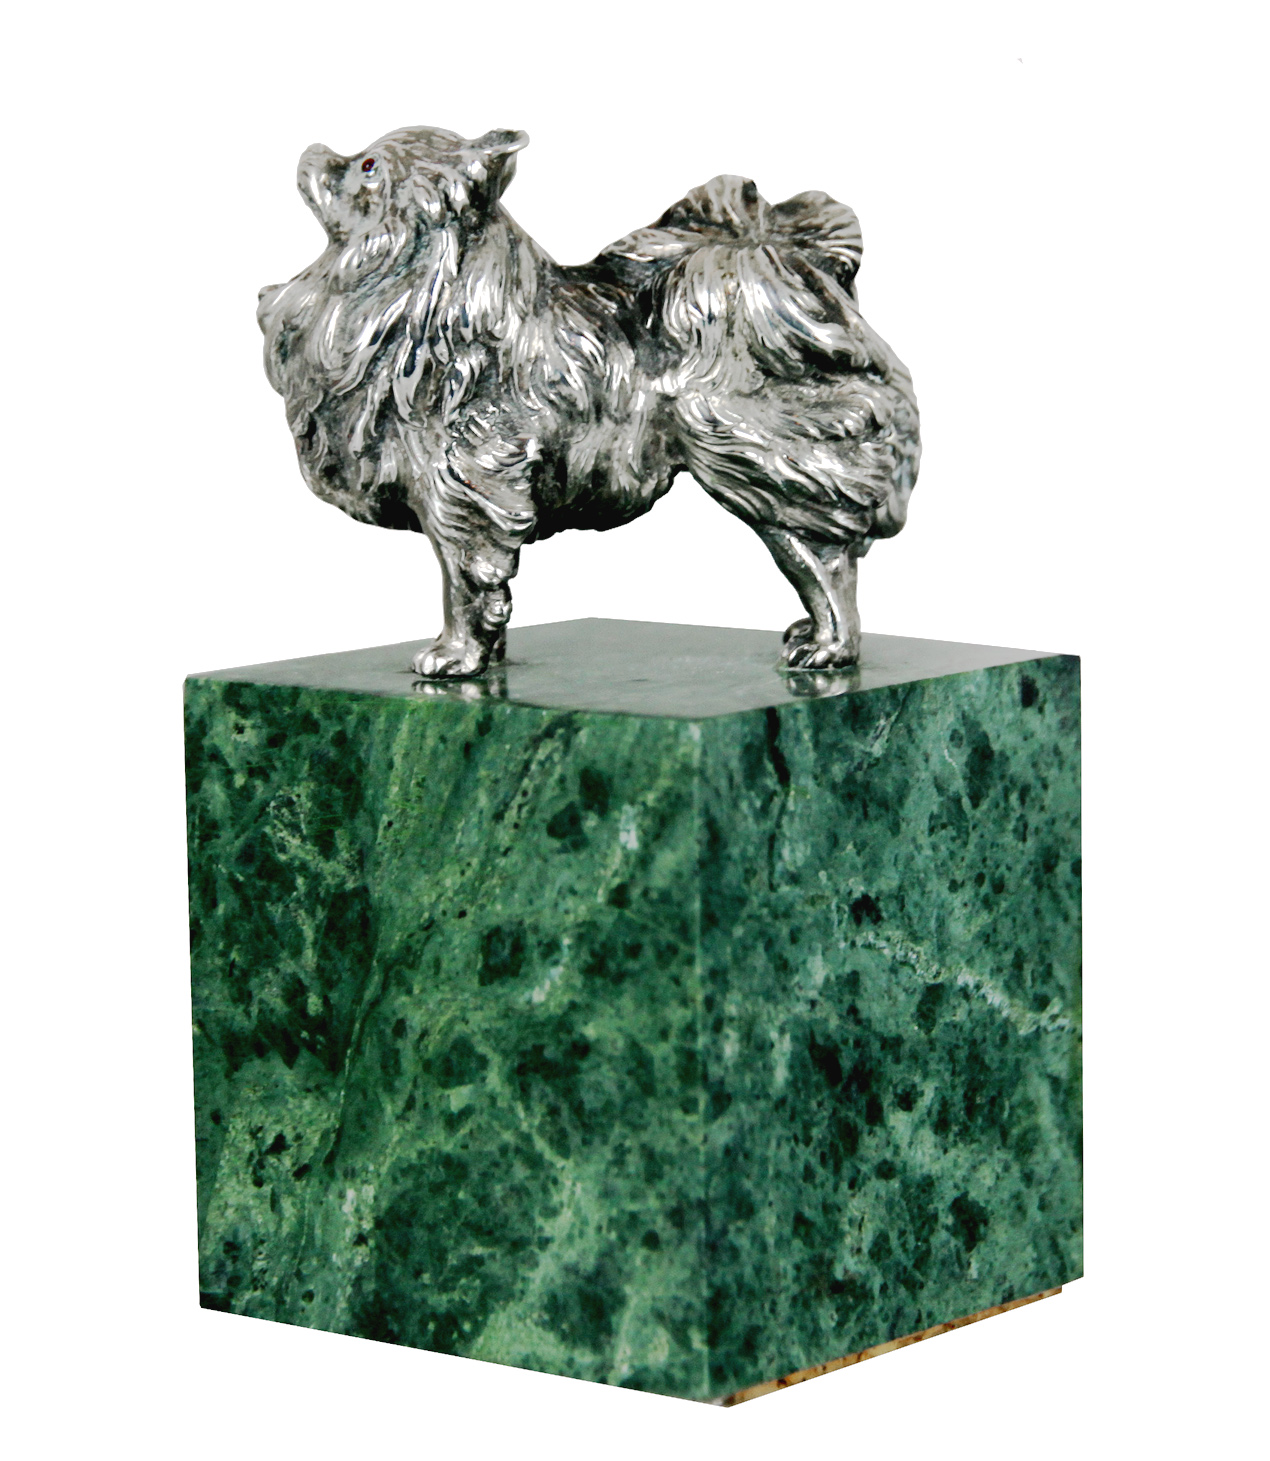 Click for larger image:  An English 1920’s Pomeranian paperweight by John Henry Hill  - An English 1920’s Pomeranian paperweight by John Henry Hill <br />
